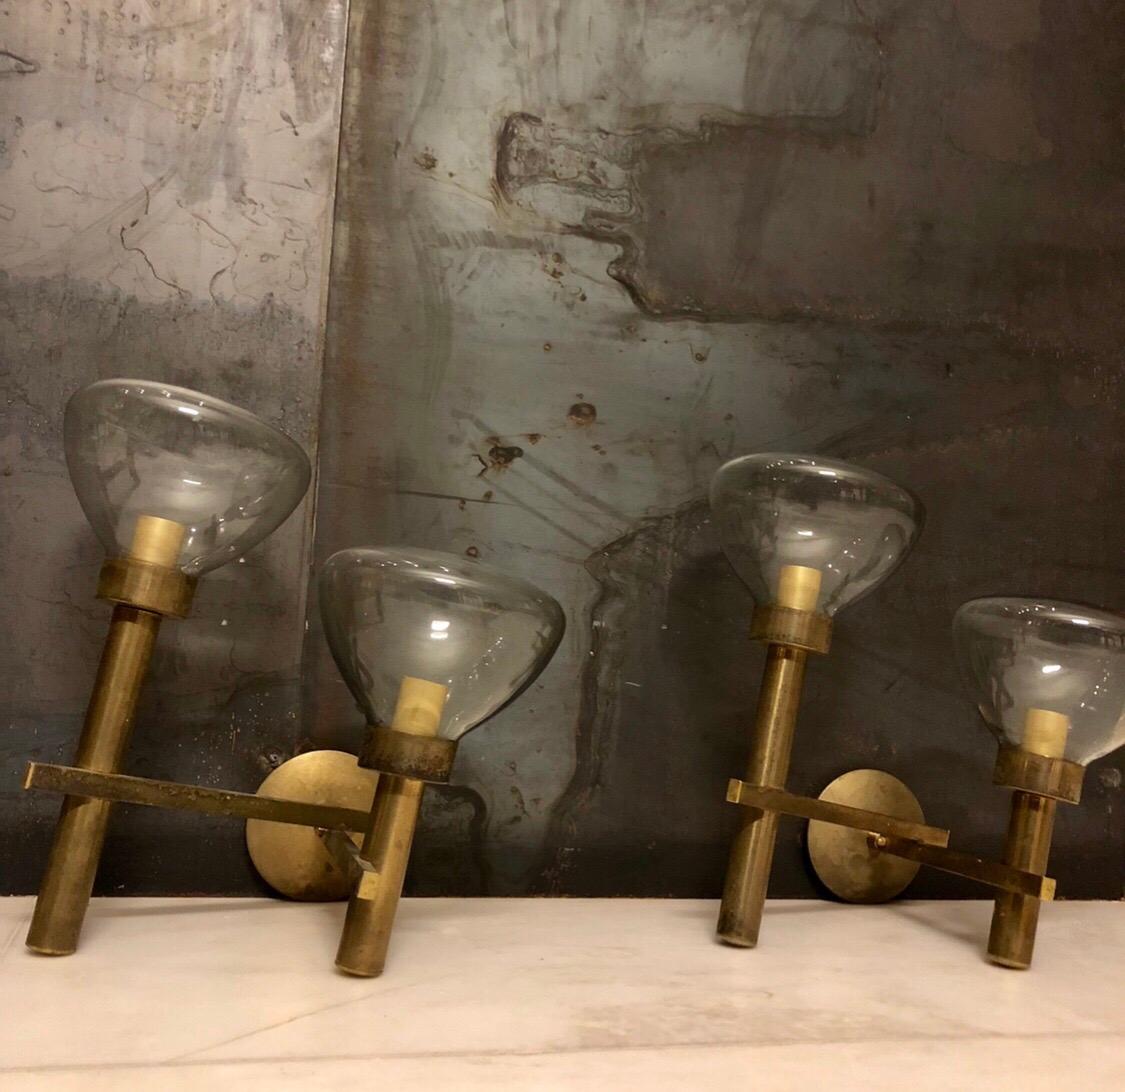 Produced by Sciolari during the 1970s. Set of two large sconces made of brass and transparent grey glasses from Murano. Good vintage conditions with new wiring.
Brass with original patina and signs of use and age. Each sconce mounts two socket for